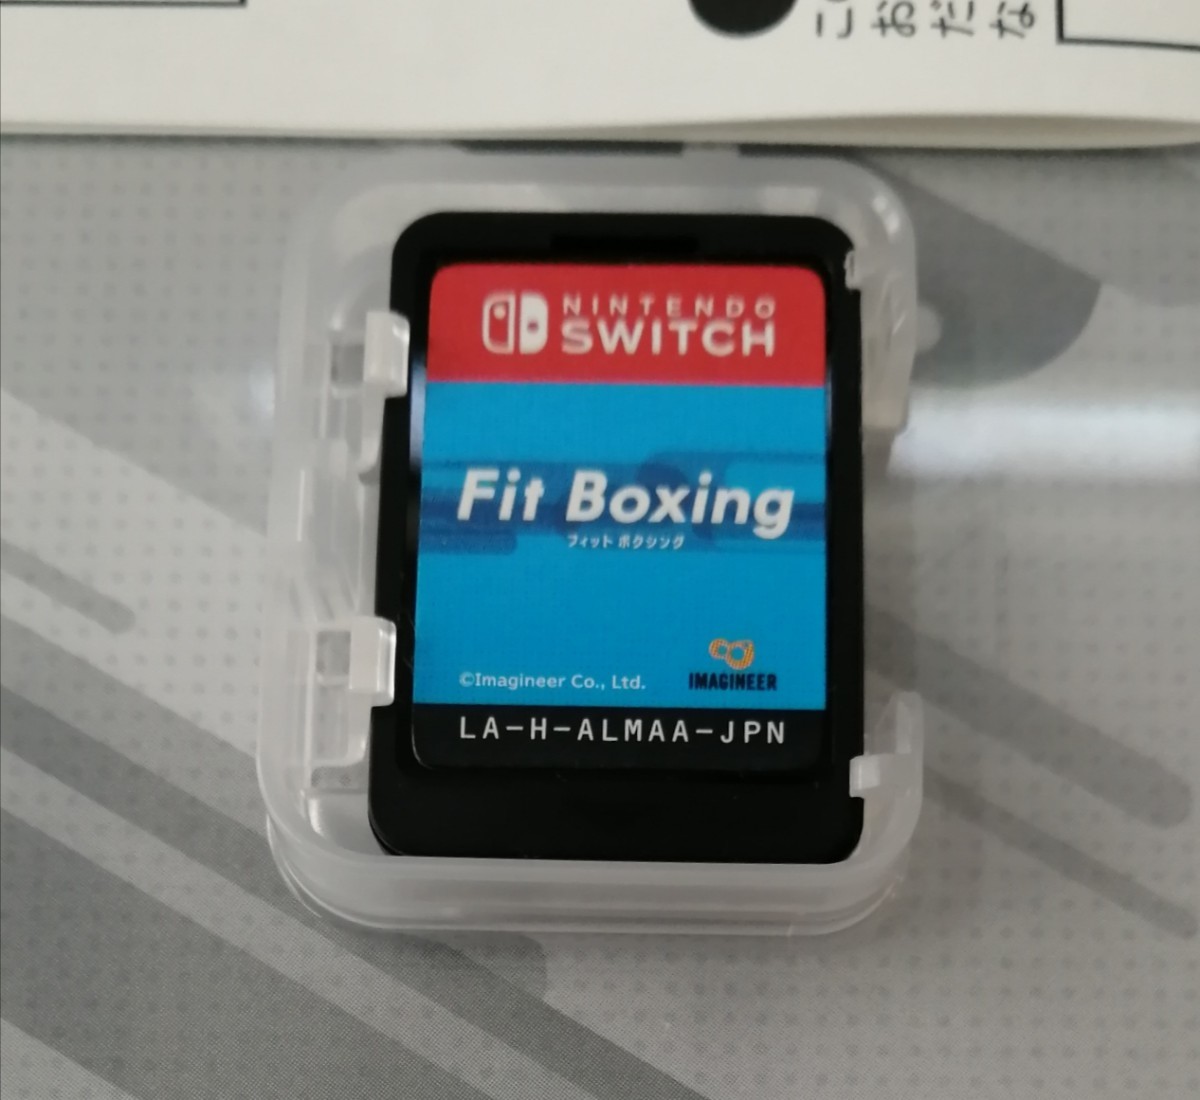 Fit Boxing Switchソフト　フィットボクシング　中古美品　送料無料